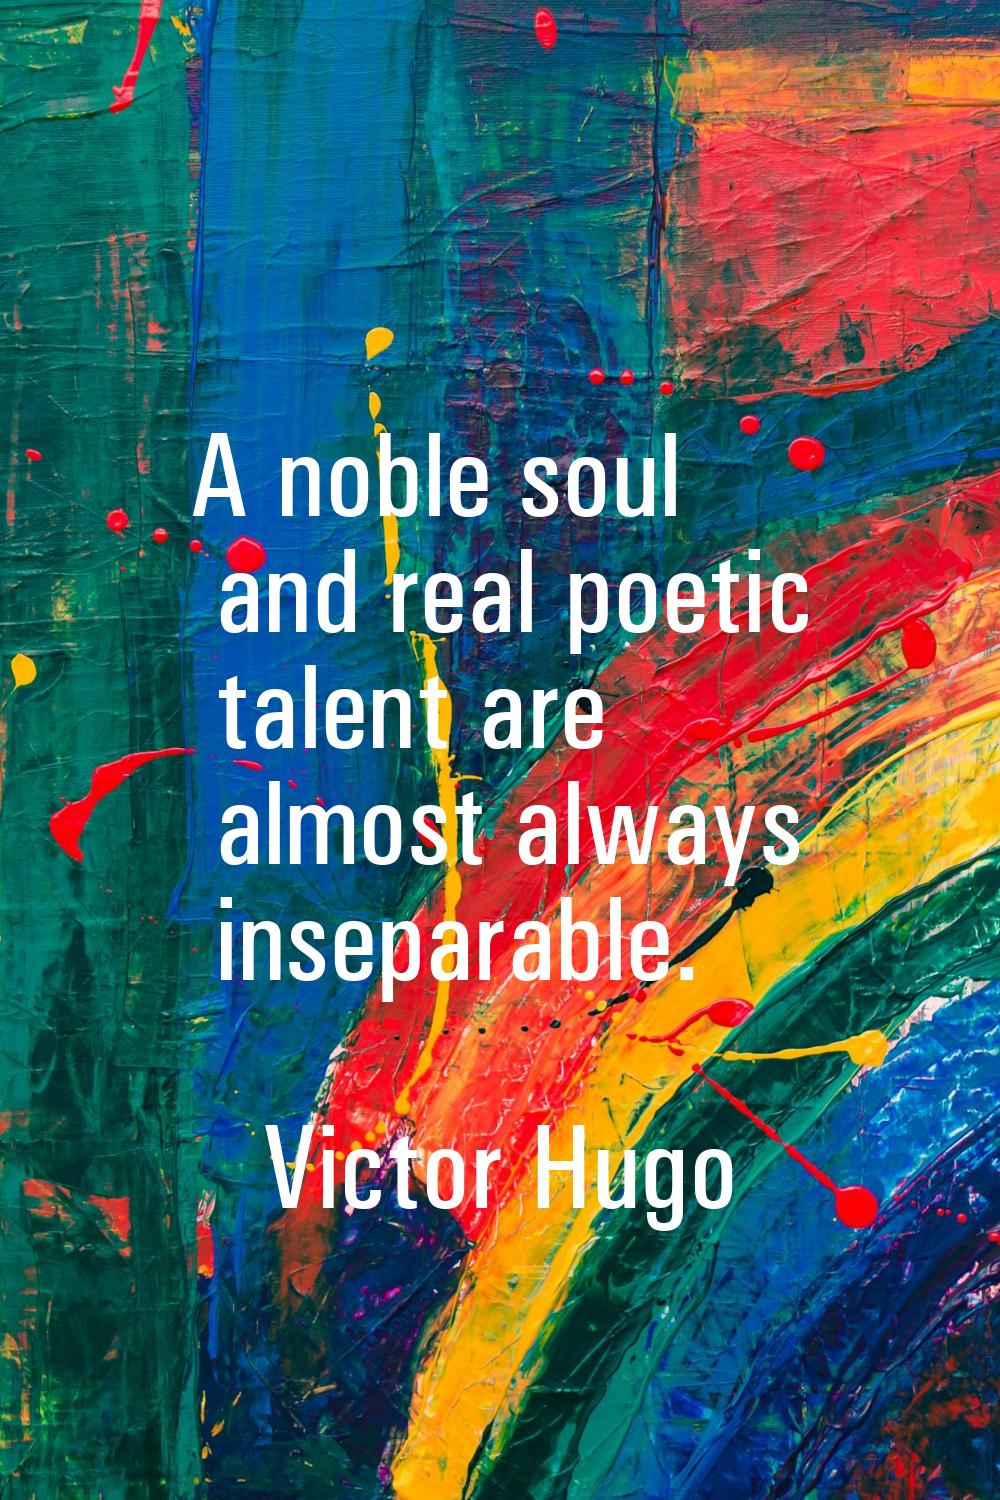 A noble soul and real poetic talent are almost always inseparable.